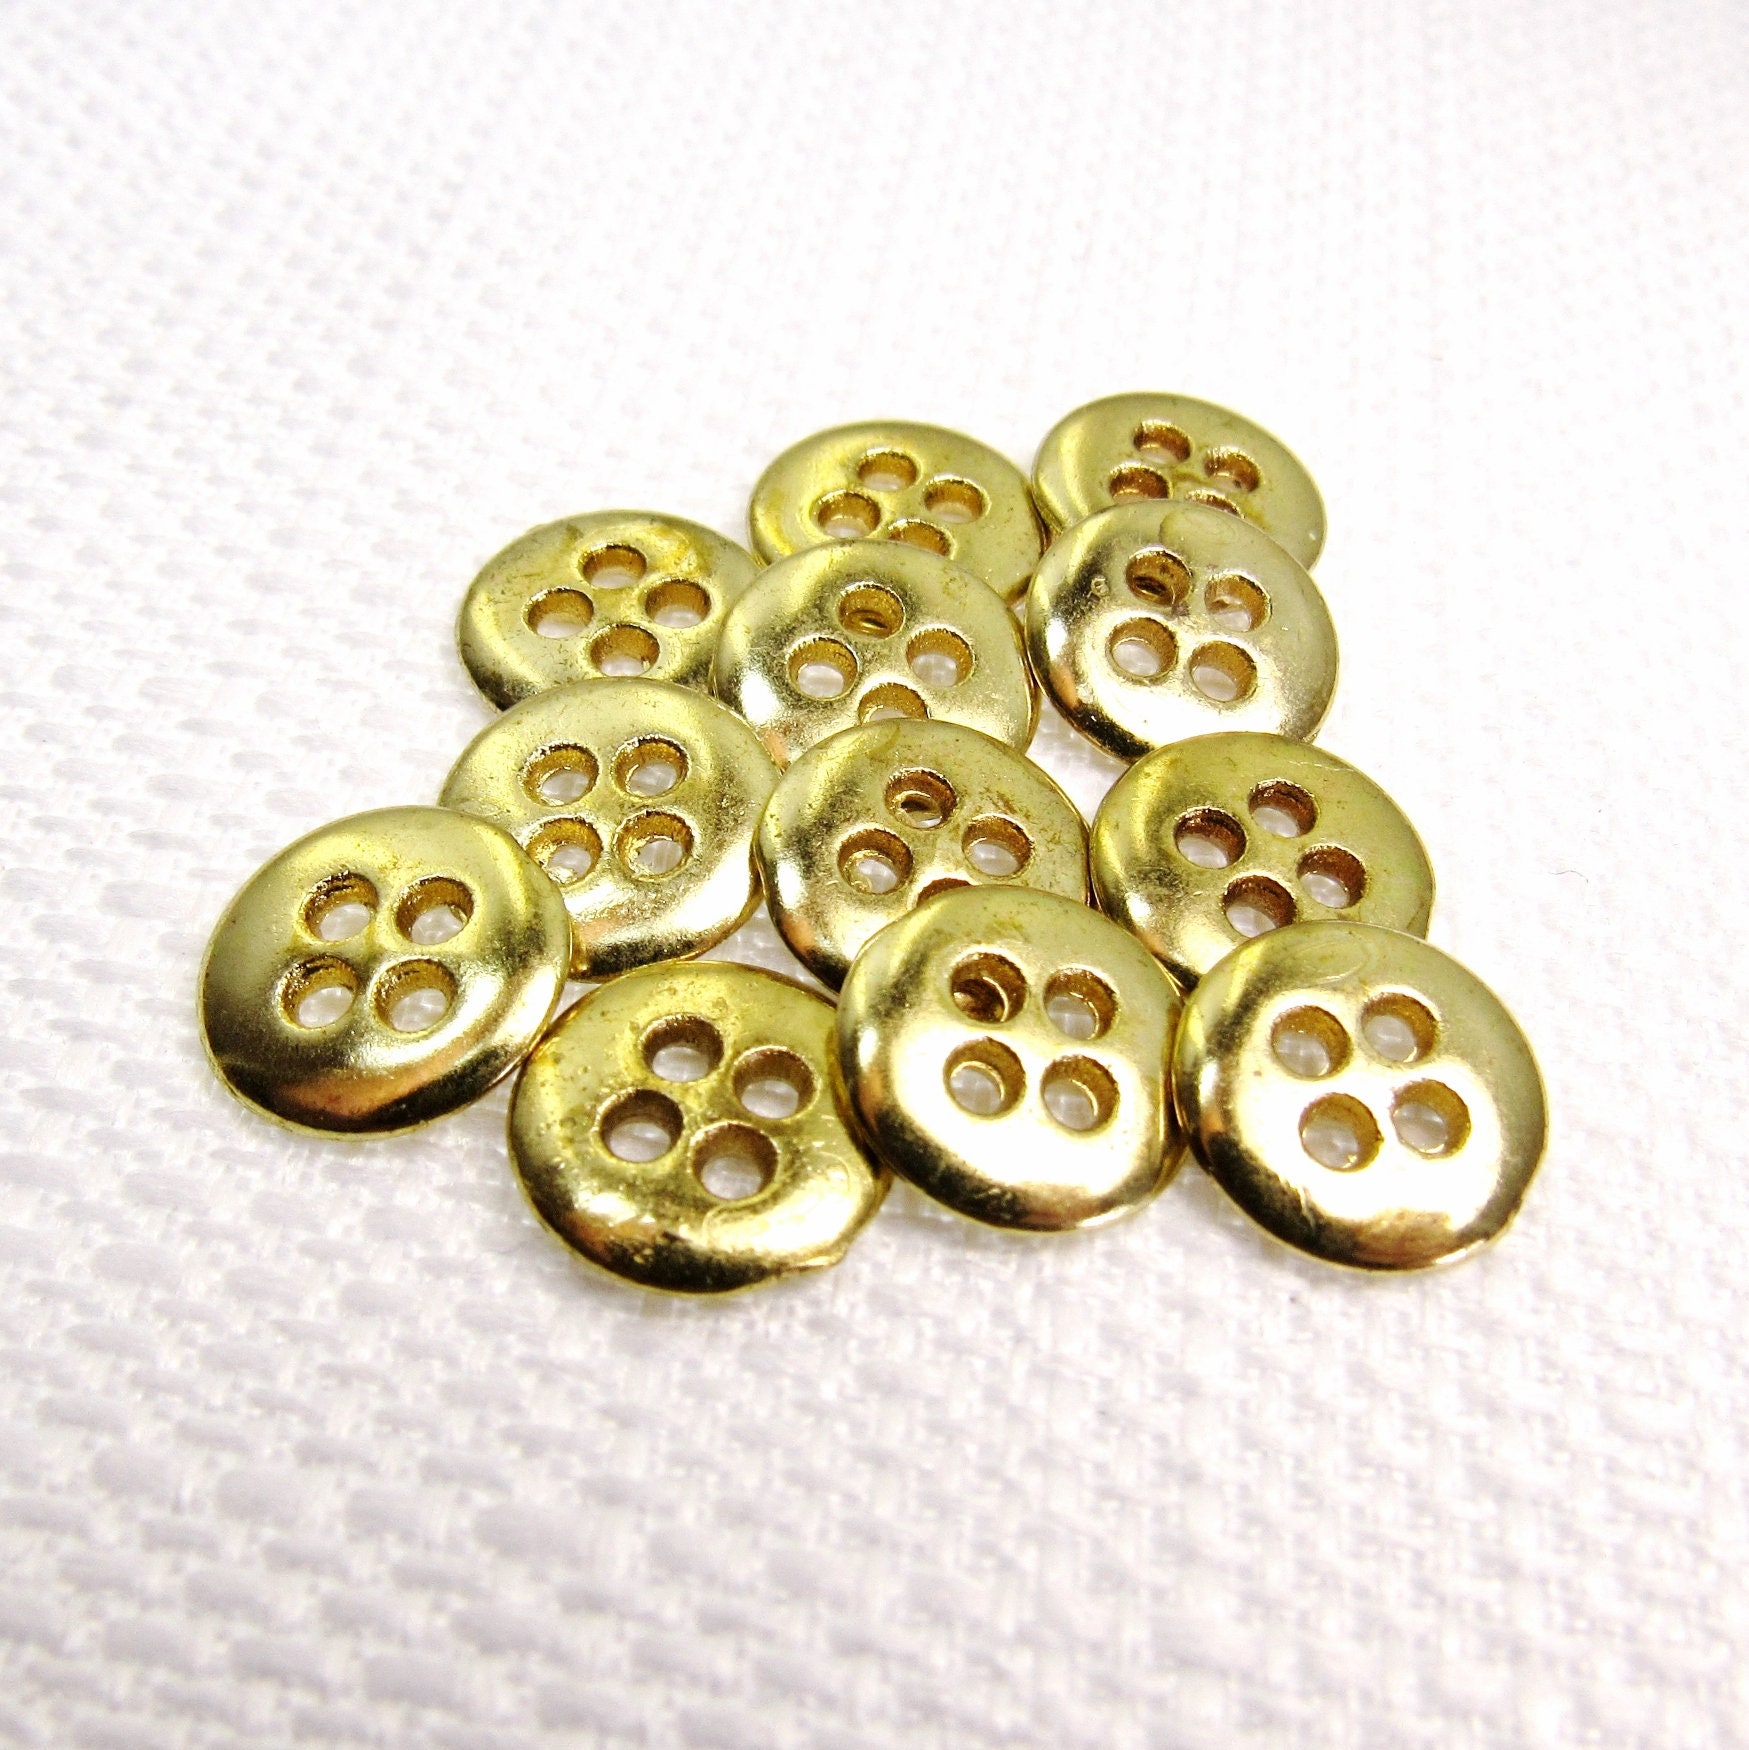 Vintage Style Button Magnets Metallic Set of 12 Extra STRONG